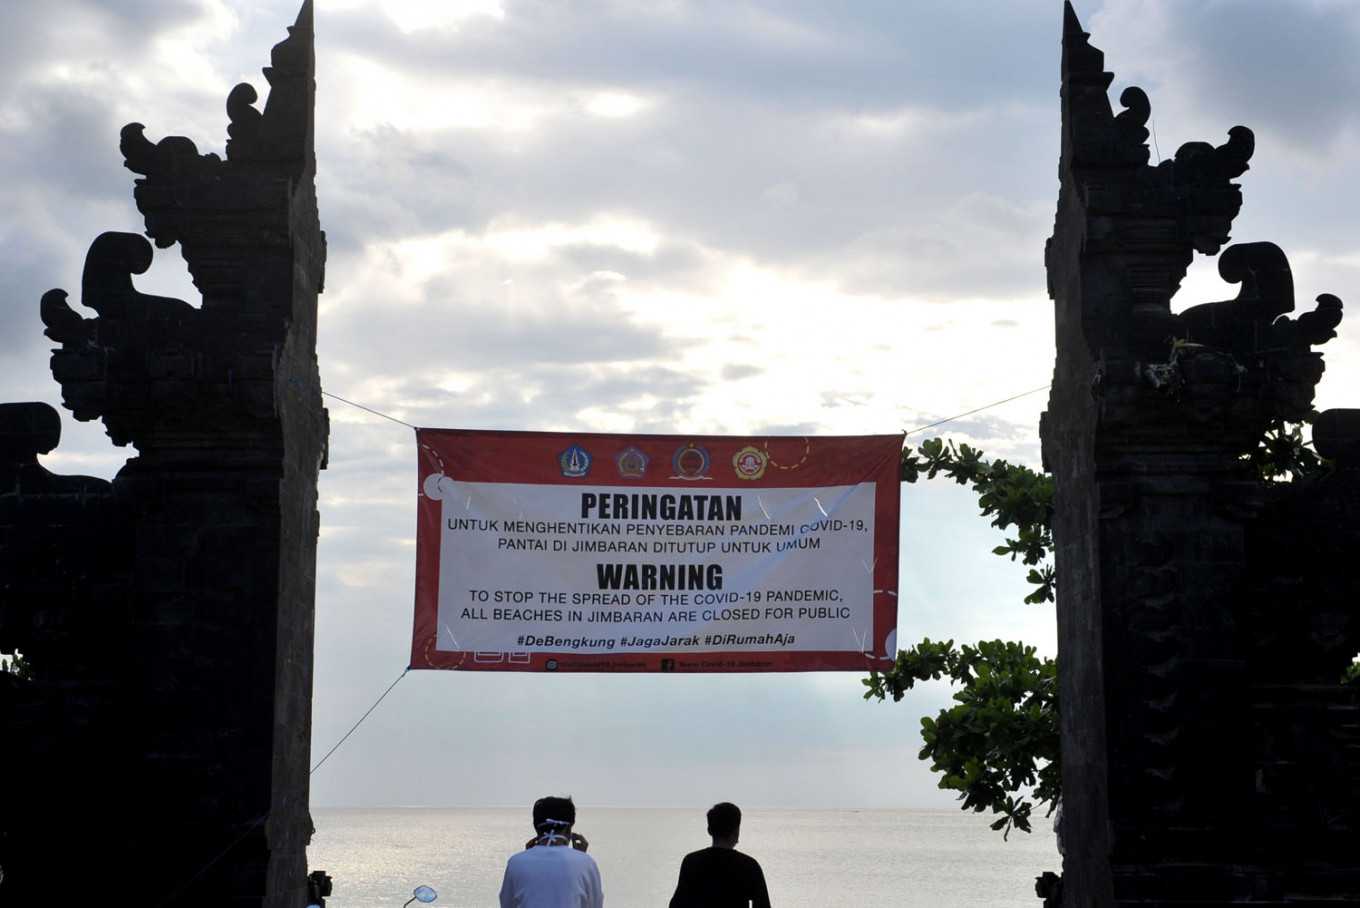 Fears above virus cast shadow on plan to restart tourism